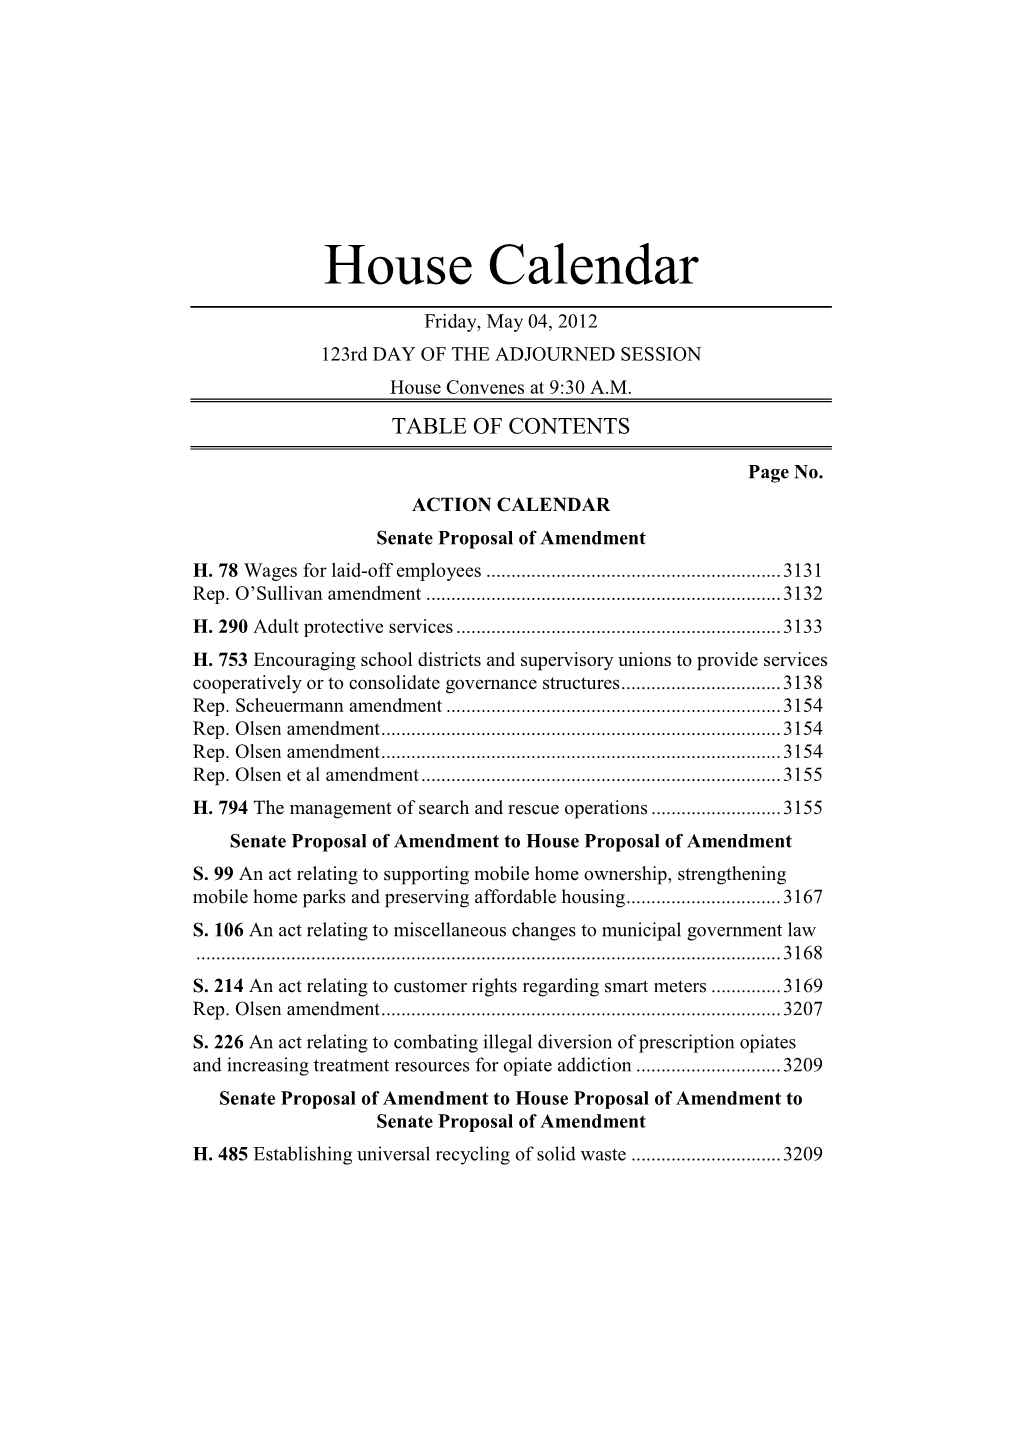 House Calendar Friday, May 04, 2012 123Rd DAY of the ADJOURNED SESSION House Convenes at 9:30 A.M